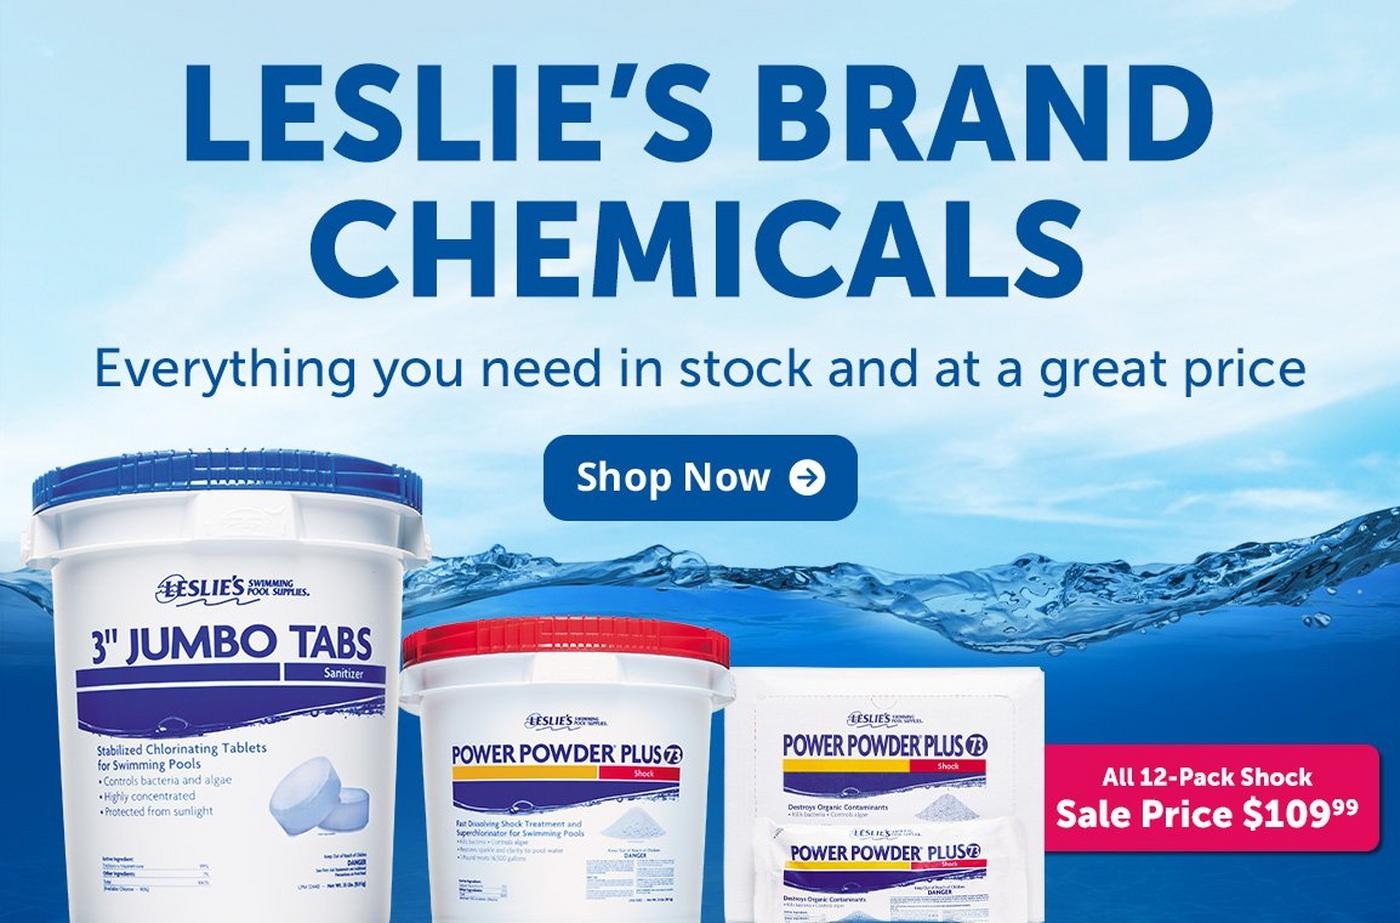 Leslies Brand Chemicals - Everything you need in stock and at a great price